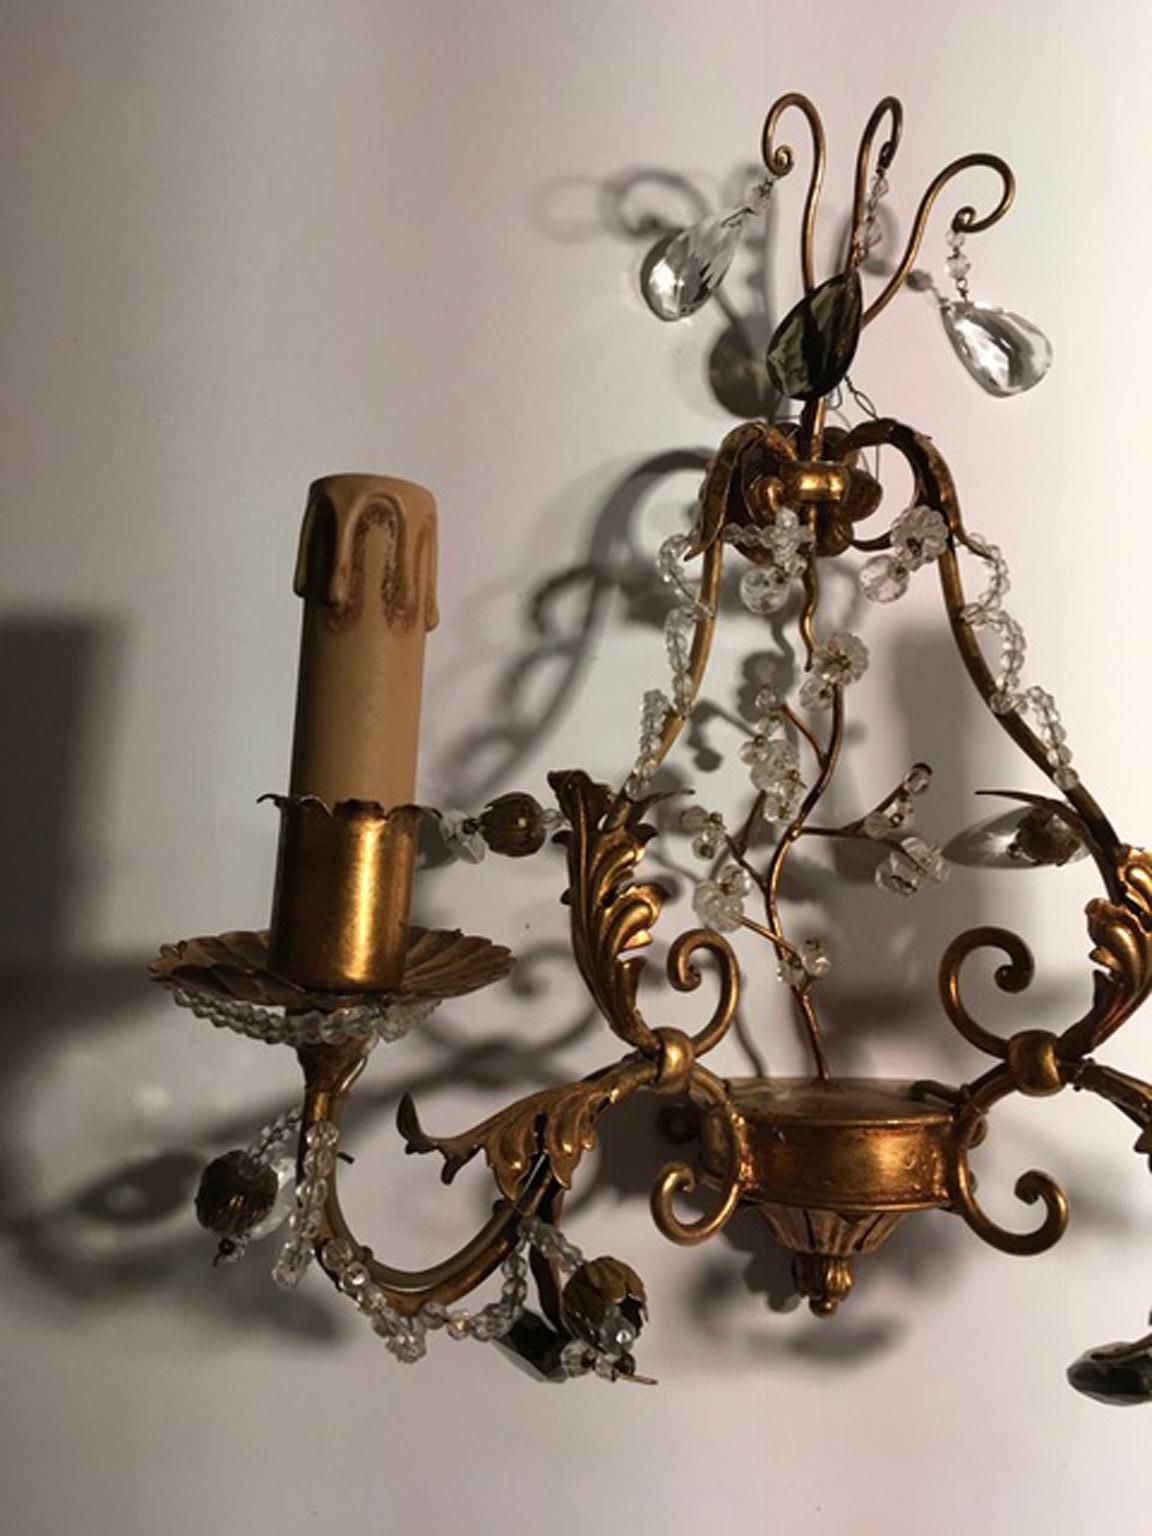 This is an Italian  patinated antique hand made iron wall sconce. The used gold finish is hand made. Many clear glass pendents and spheres enrich the wall sconce.
The two lights wall sconce is a contemporary handmade Italian production, made by one